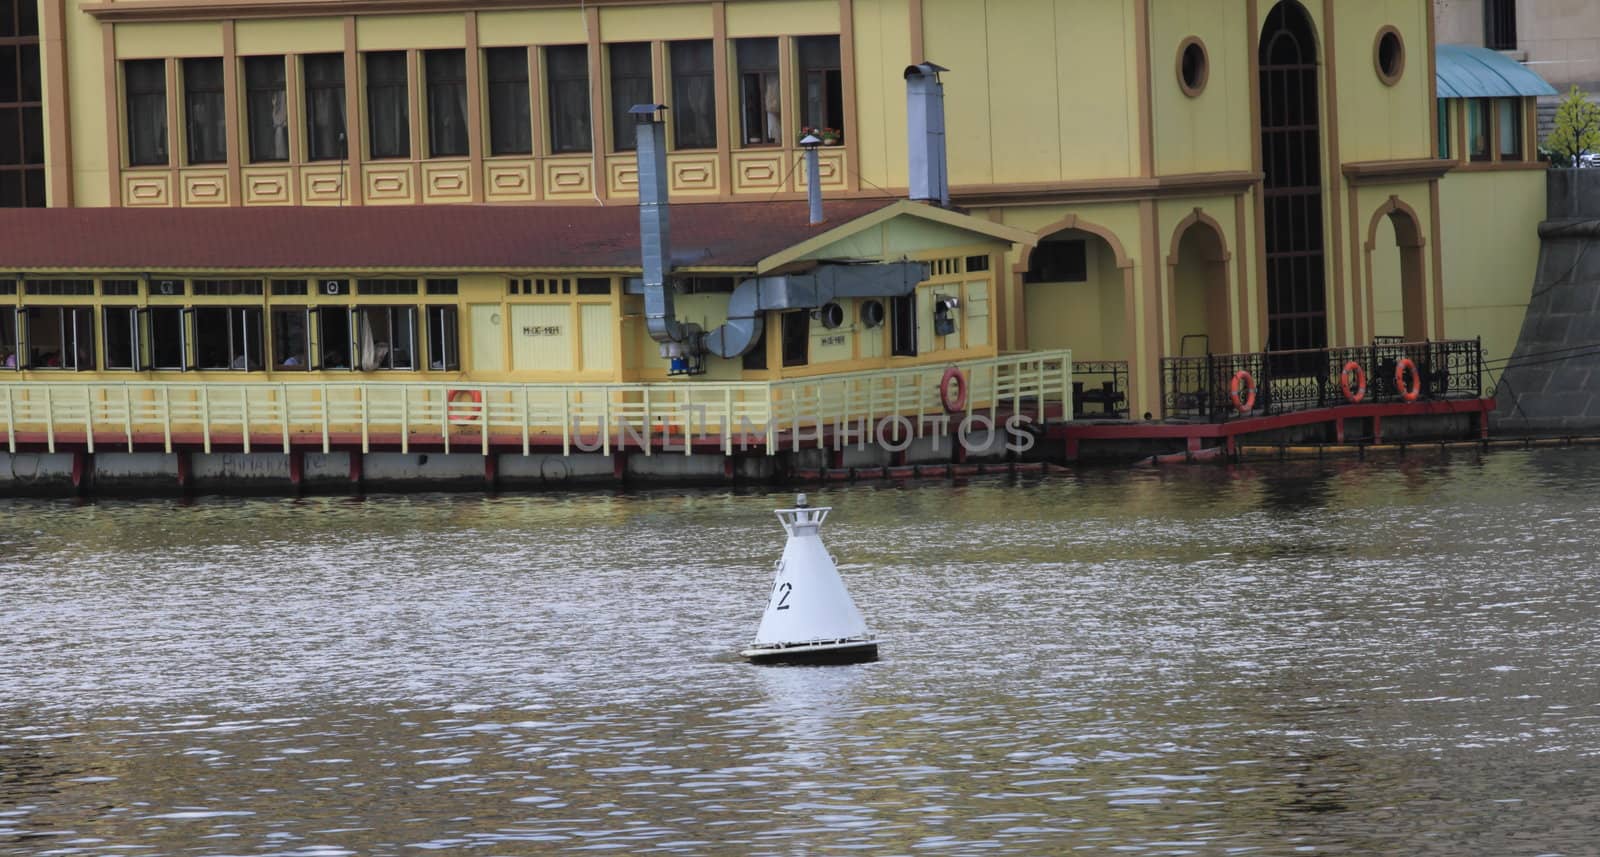 buoy on the River by victorych